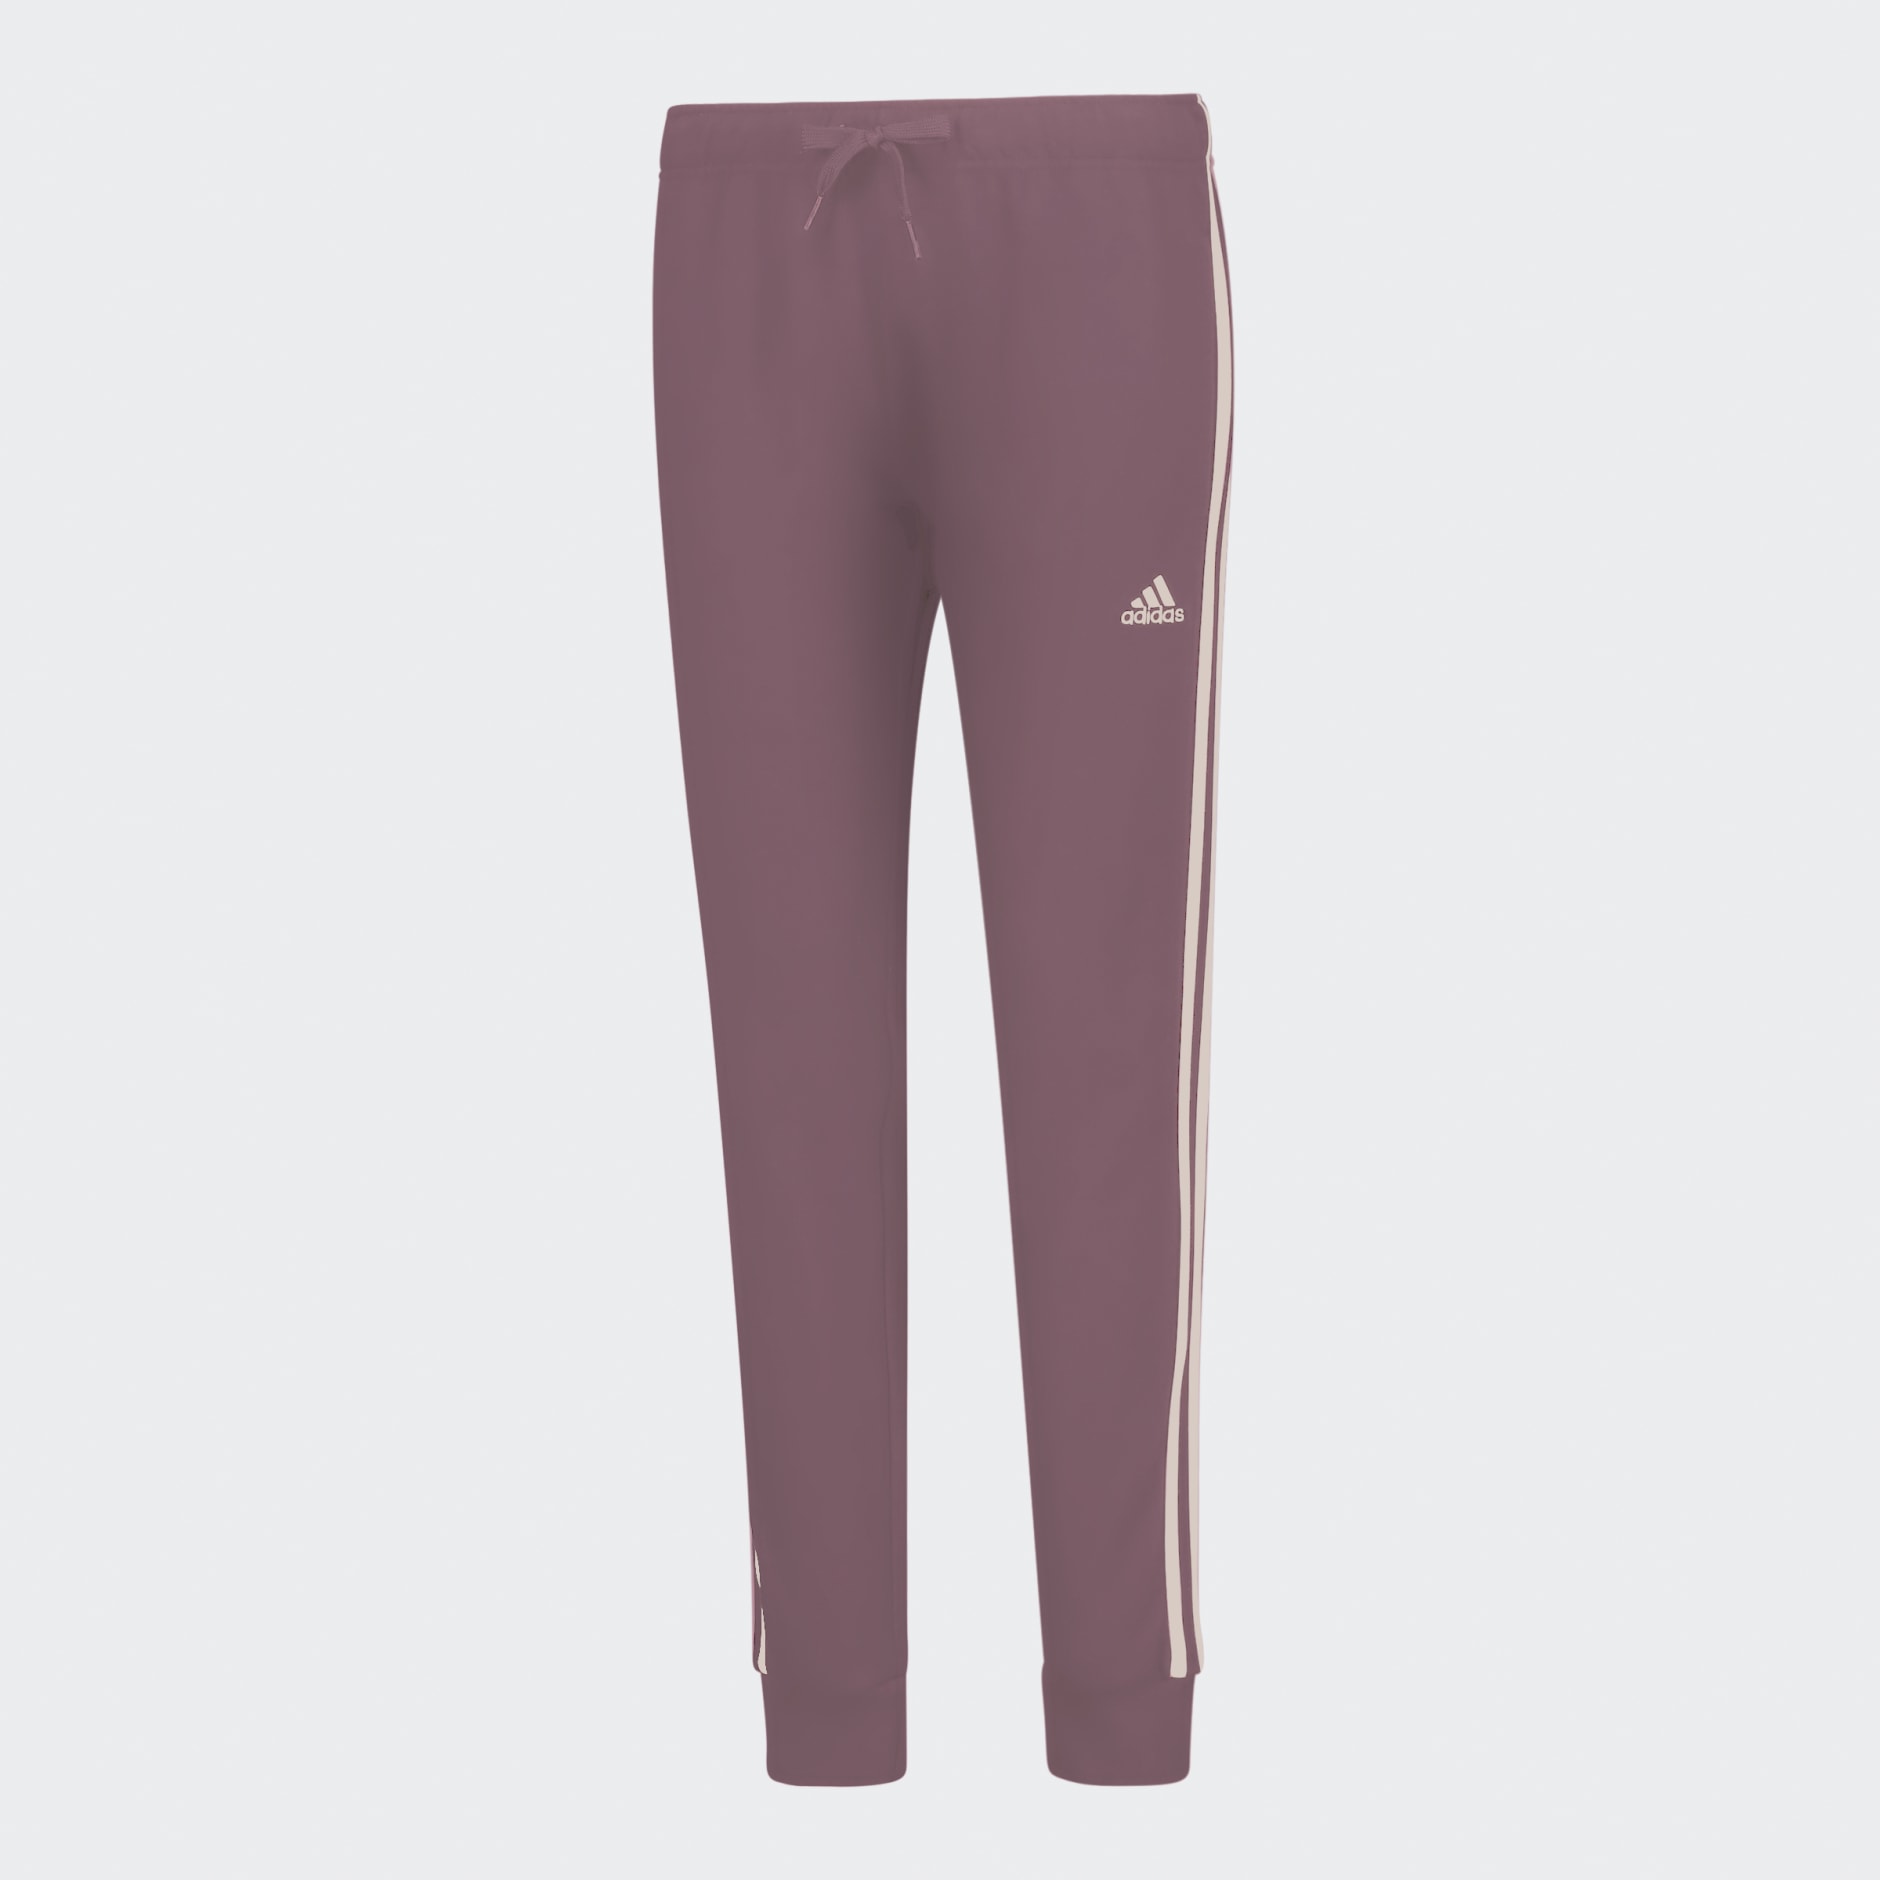 Clothing - ESSENTIALS FLEECE SLIM TAPERED CUFFED PANT - Pink | adidas ...